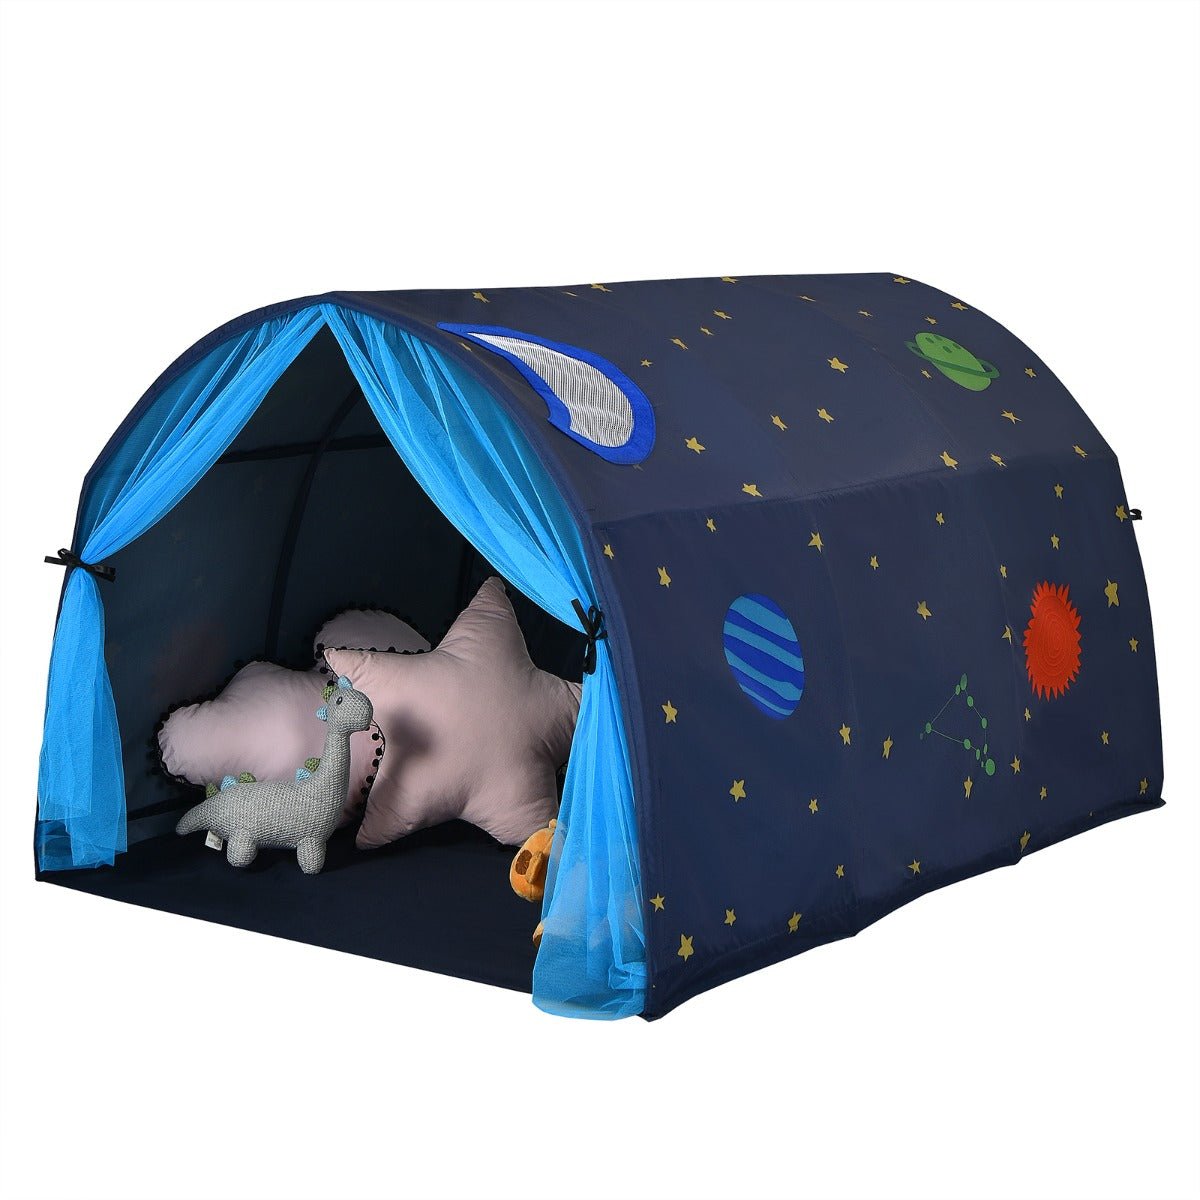 Dreamy Twin Sleeping Tent: Portable Playhouse with Carry Bag